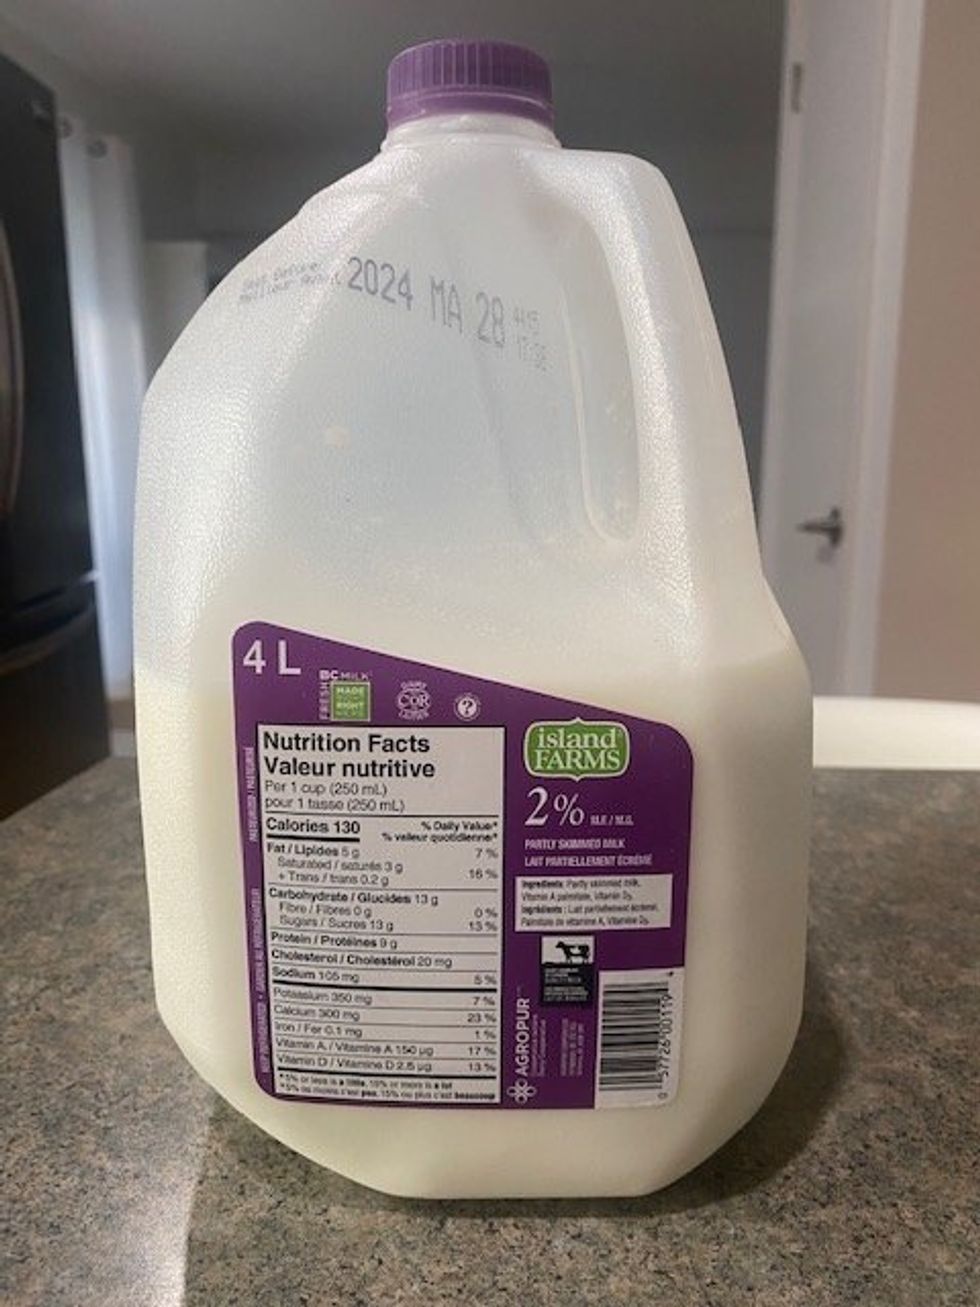 \u200bA 4-litre jug of 2% milk with a white and purple label that says Island Farms on it sitting on a brown and grey speckled kitchen counter.